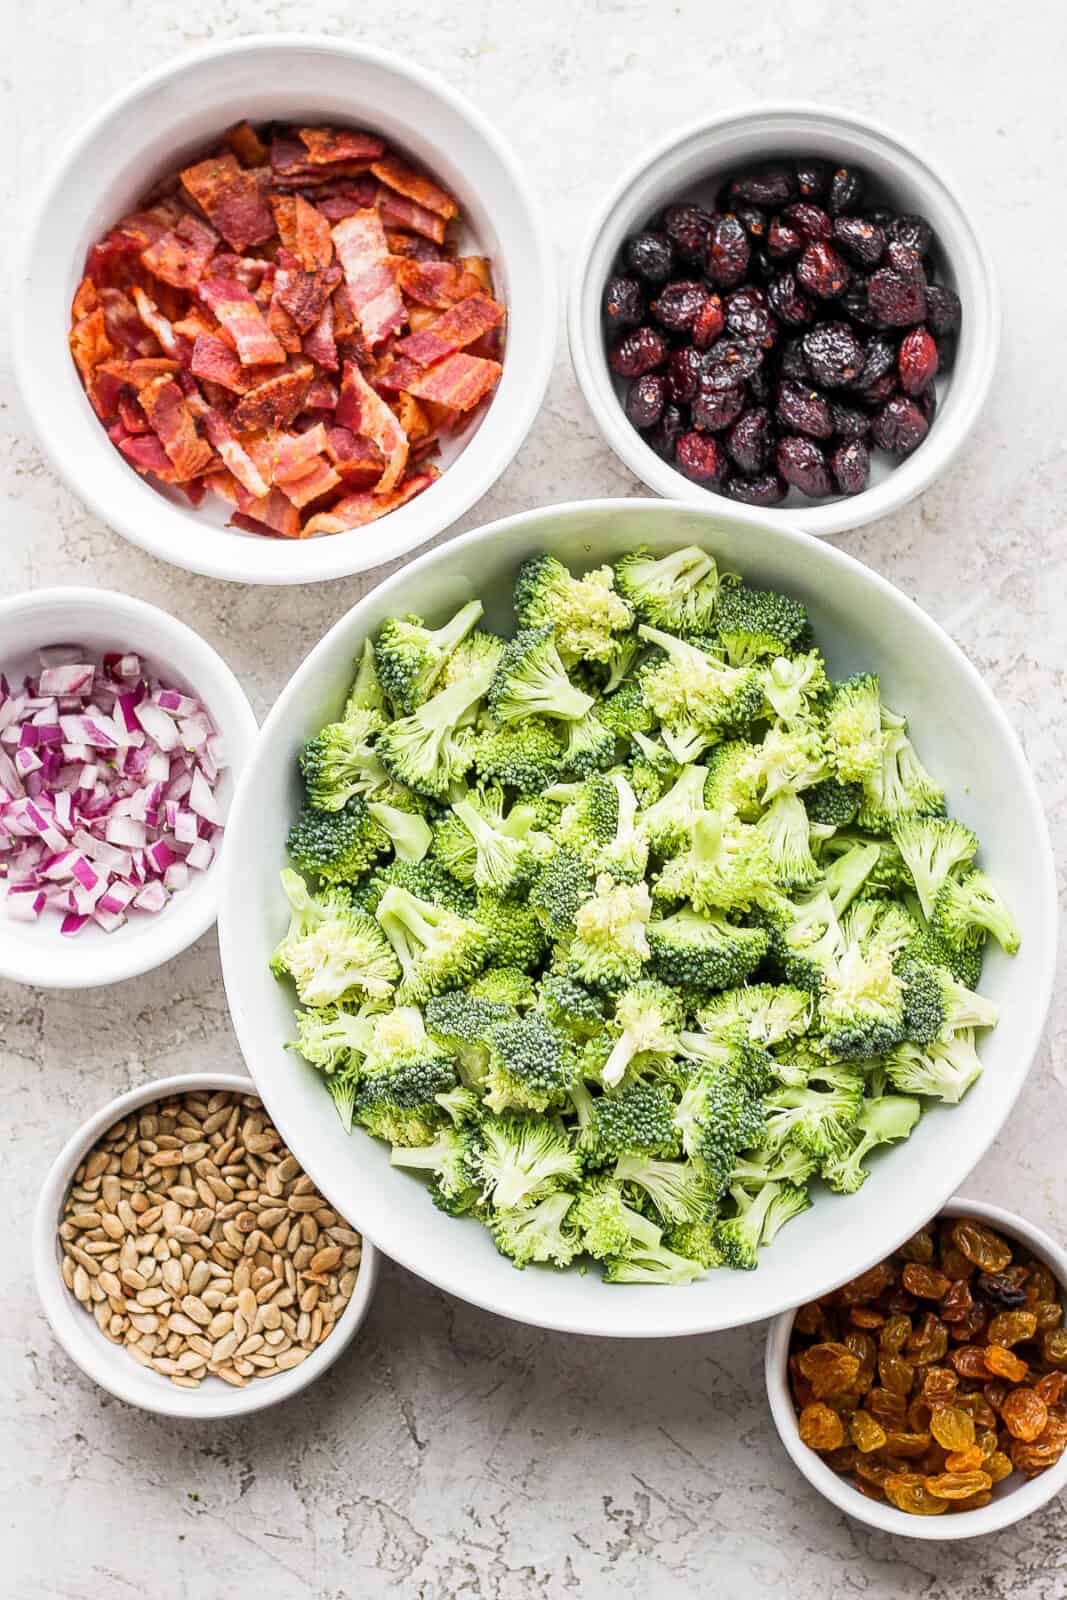 Ingredients for broccoli bacon salad in small dishes.